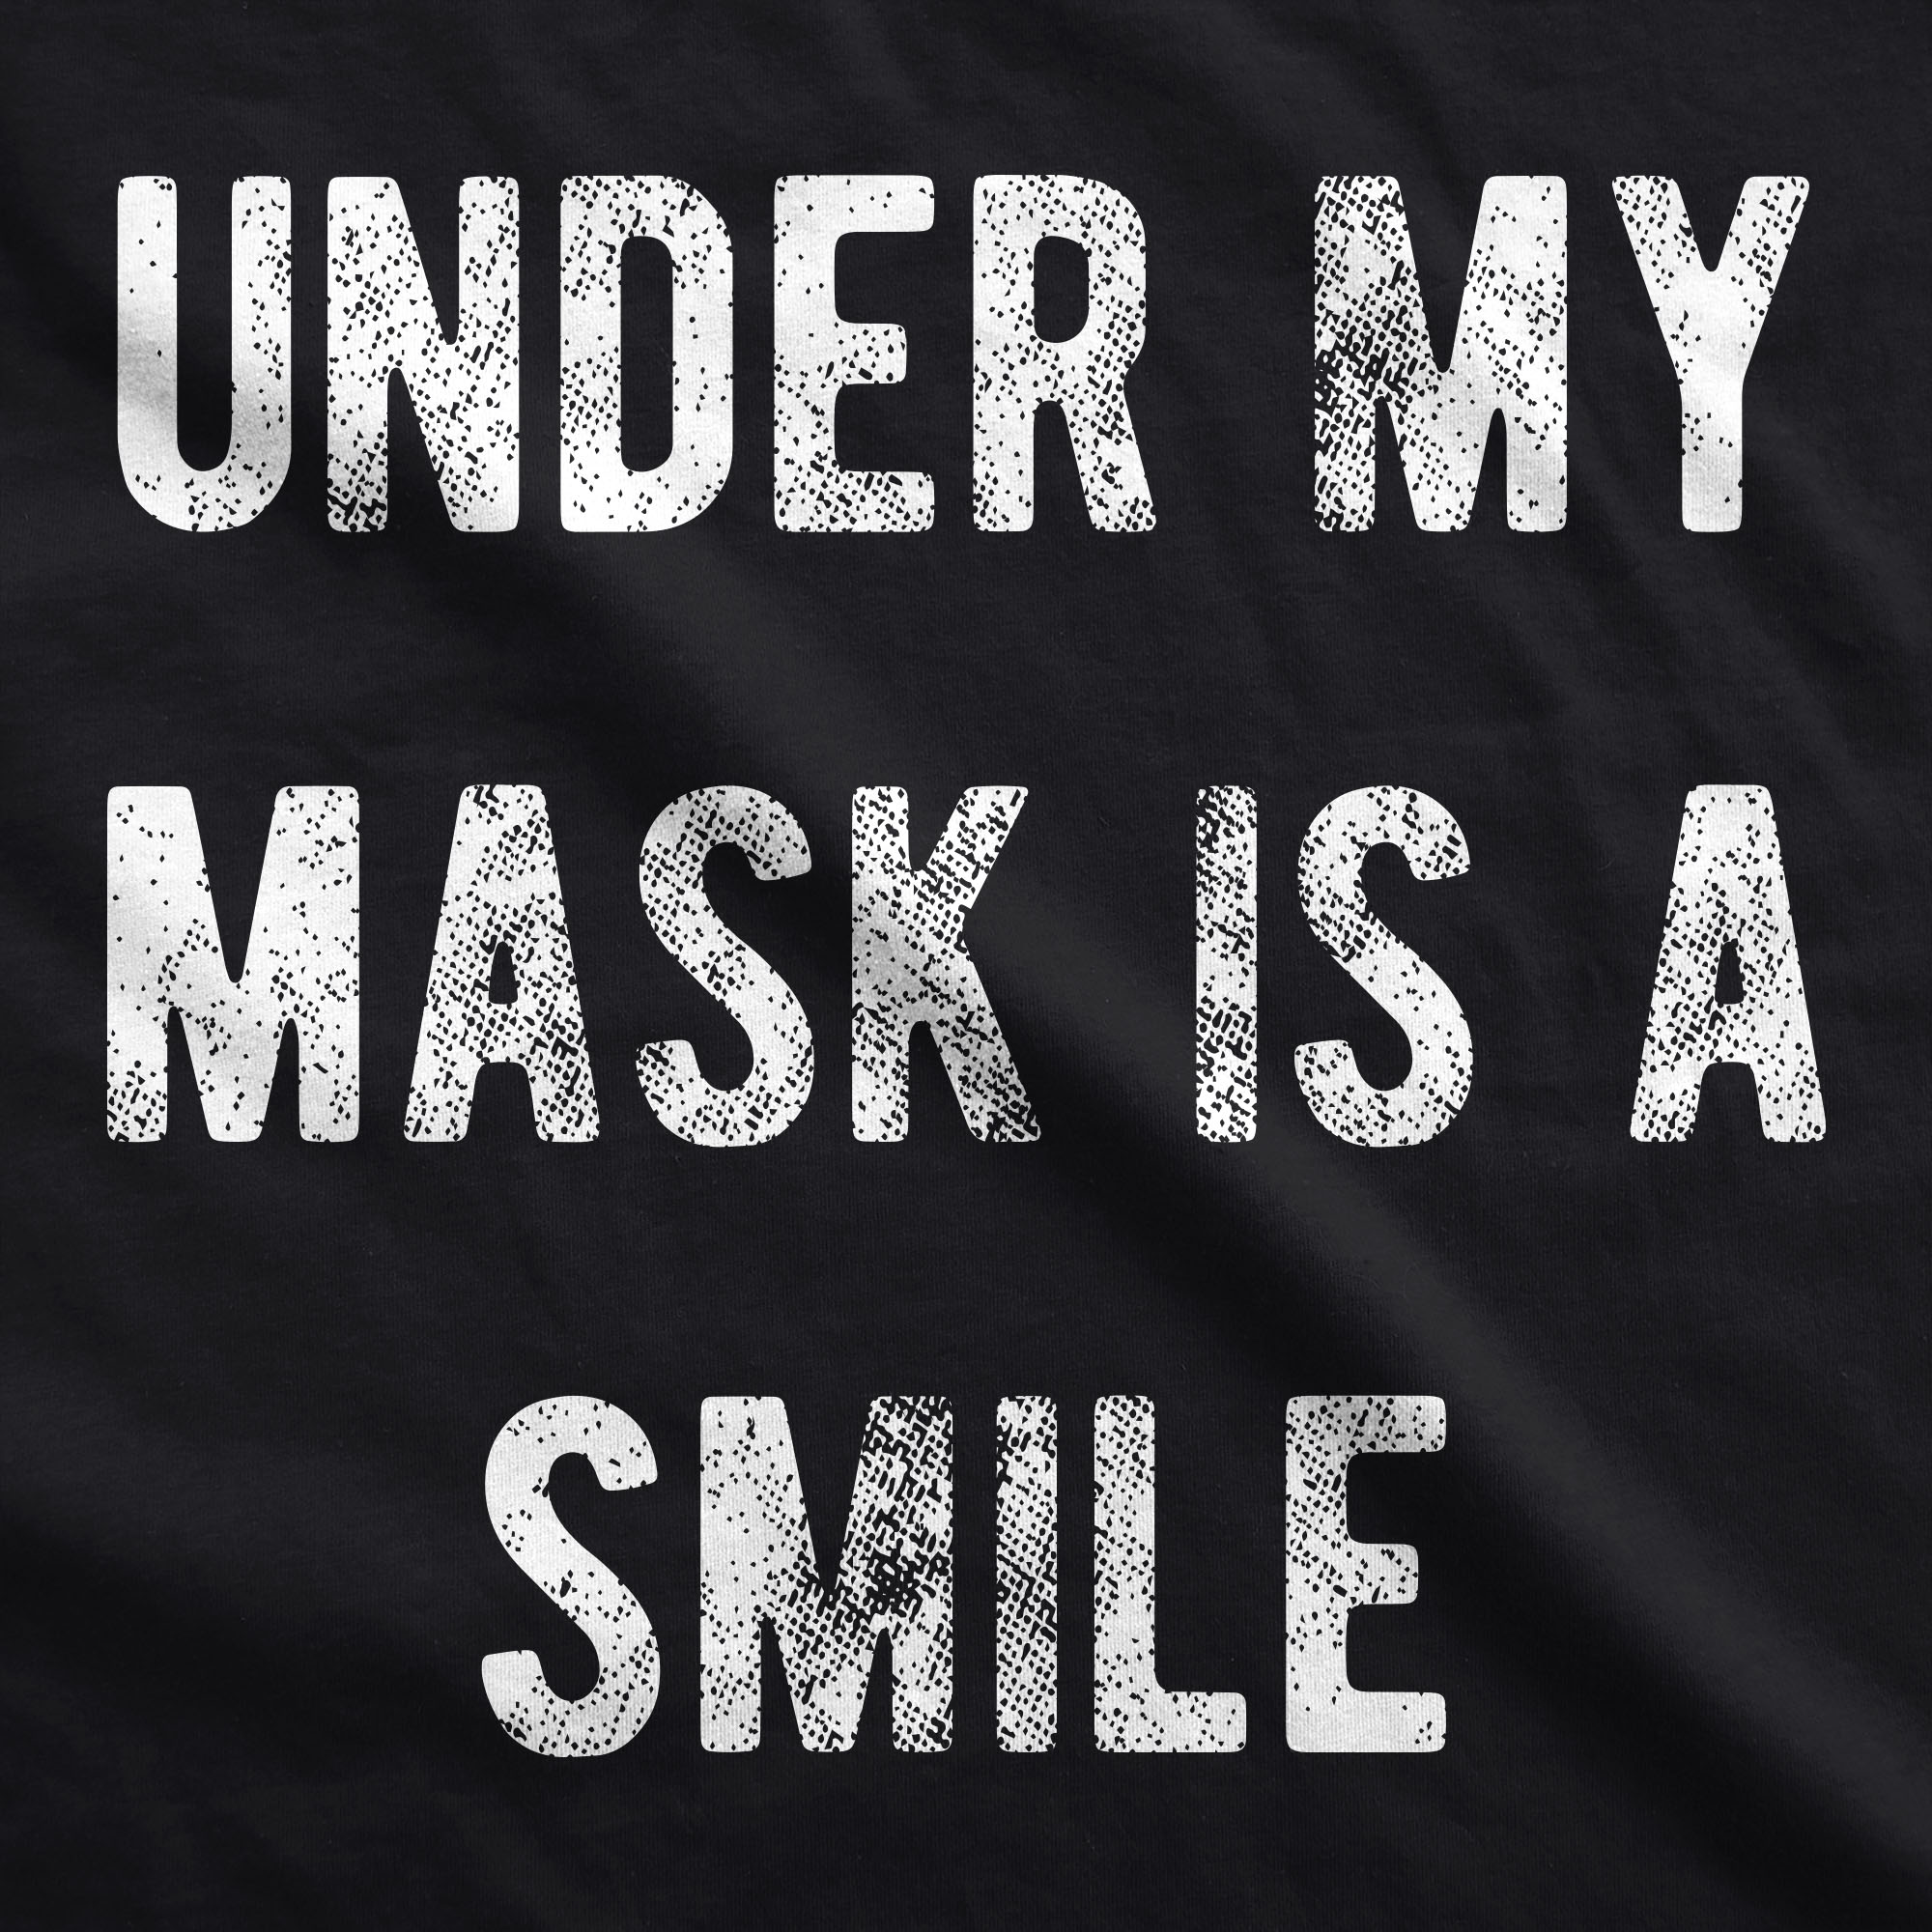 Under My Mask Is A Smile Face Mask Funny Happiness Positive Graphic Nose And Mouth Covering - image 2 of 6